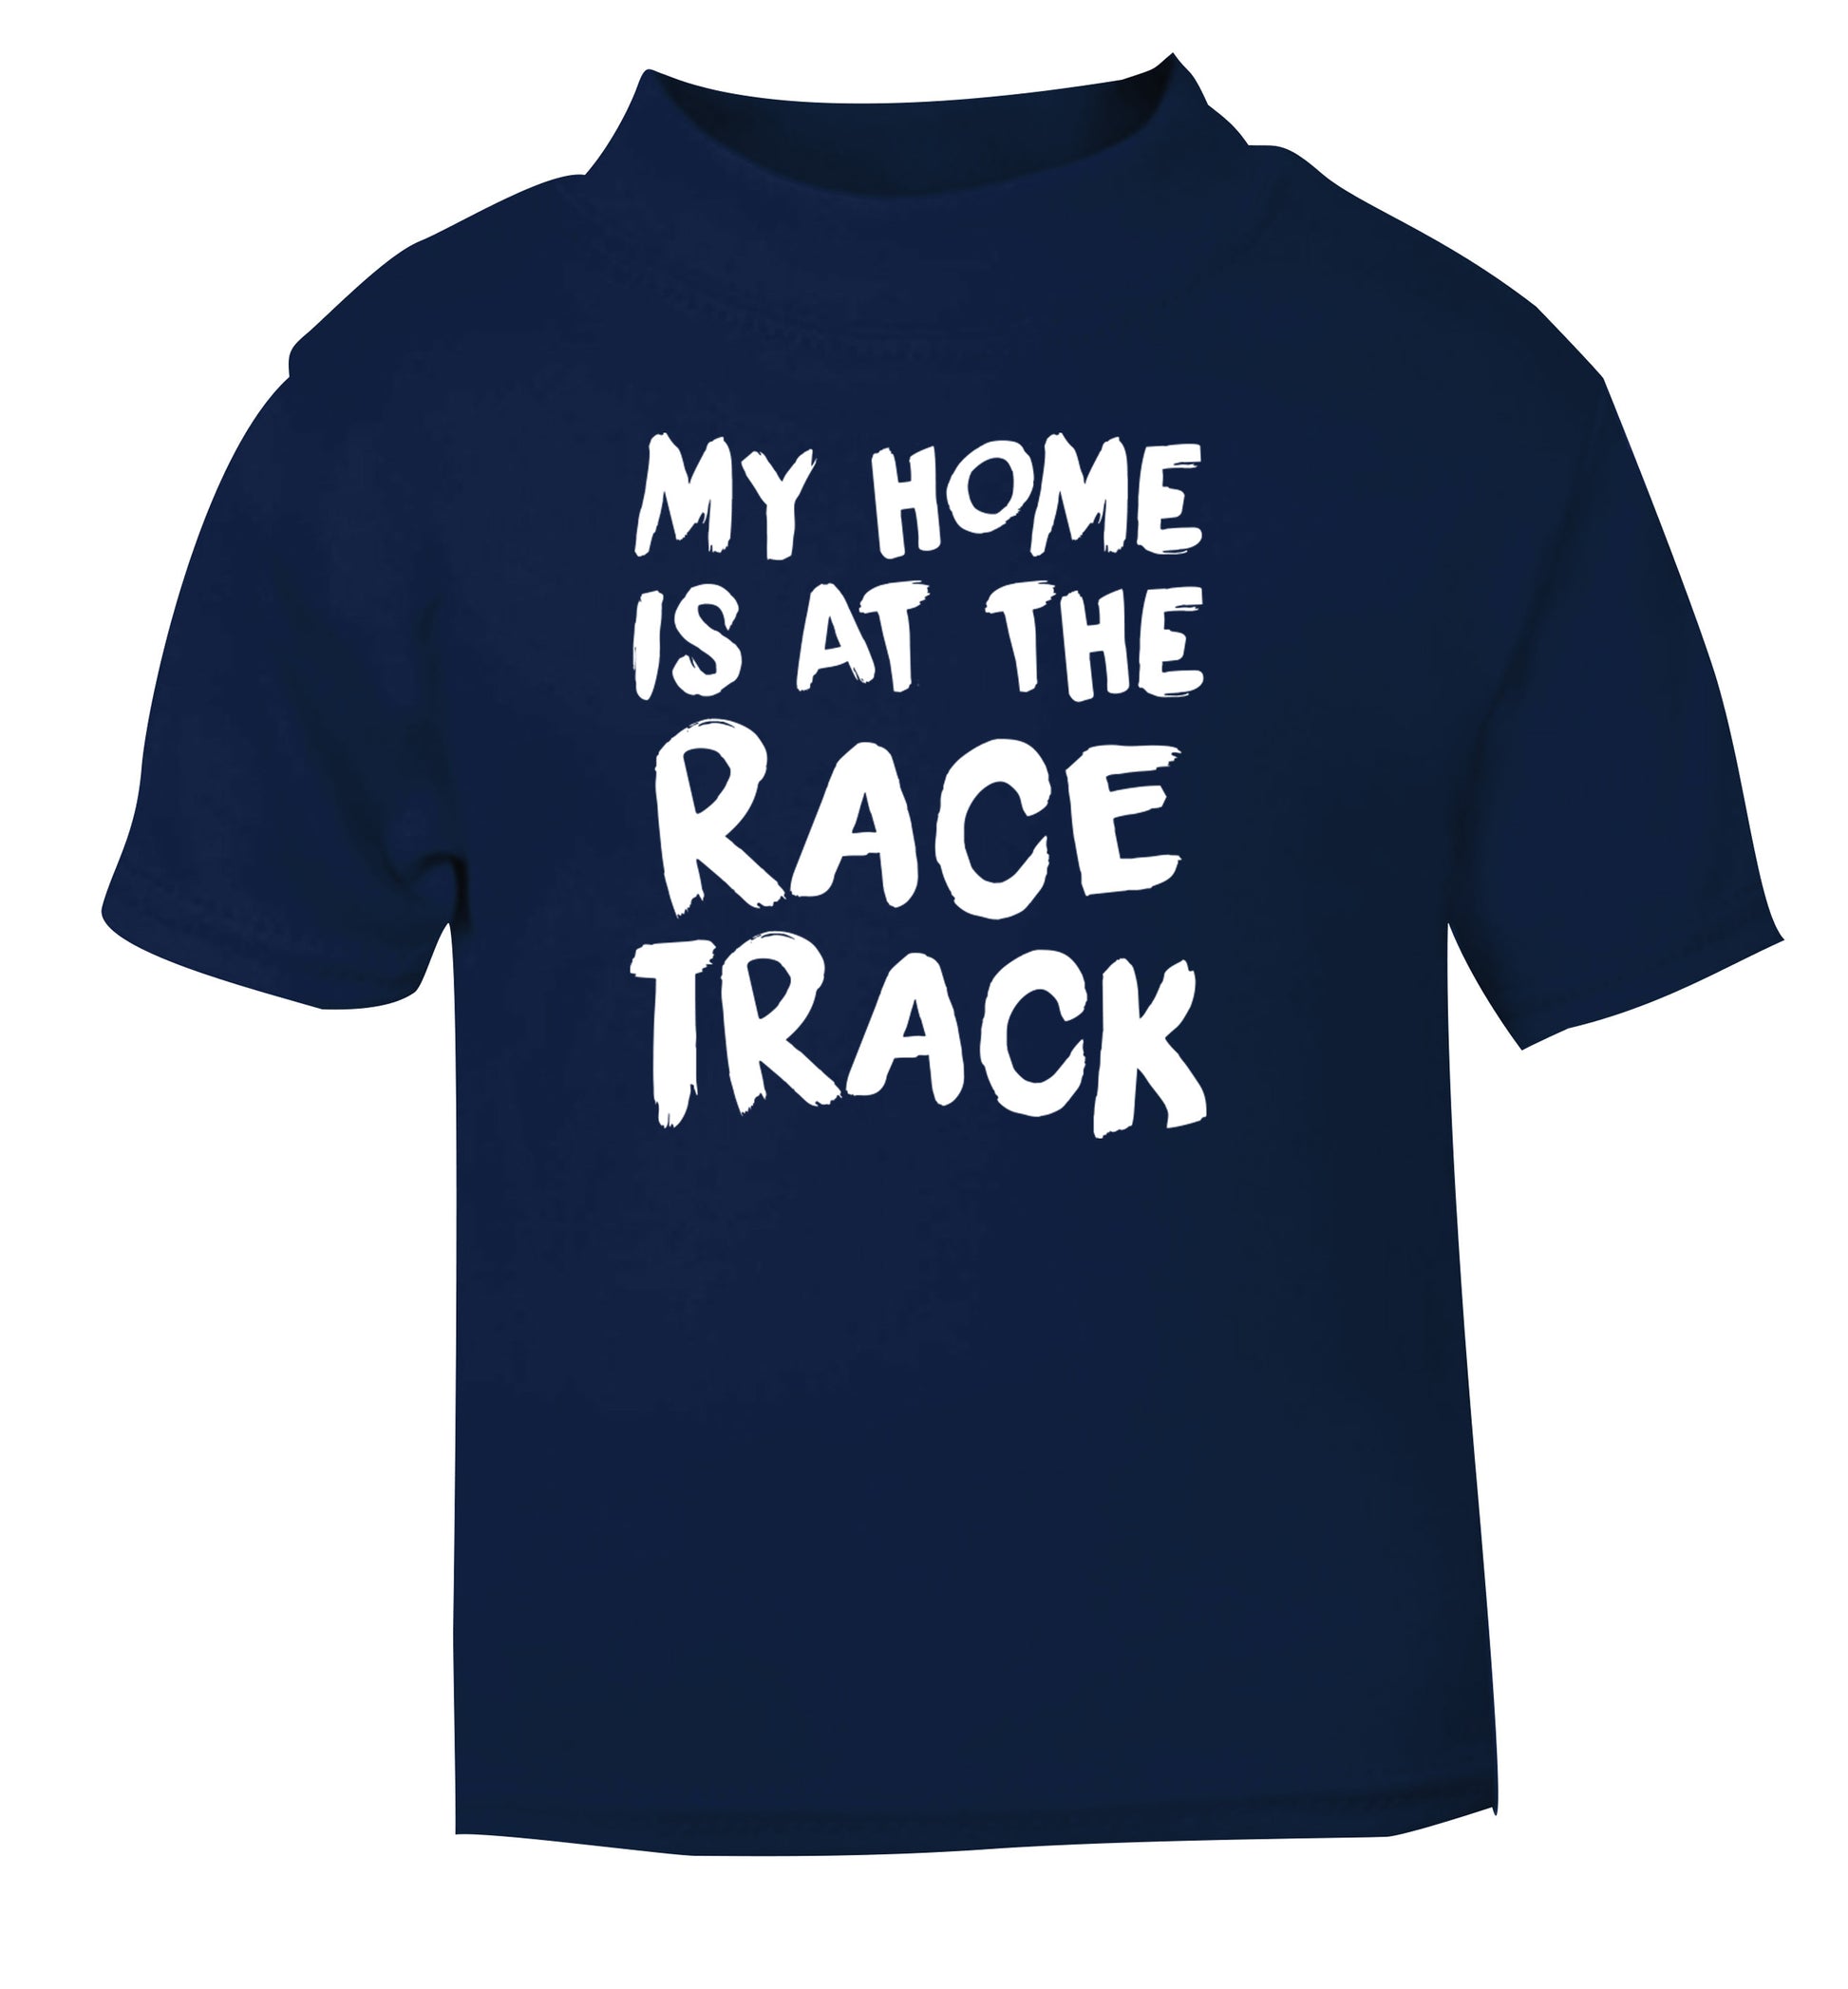 My home is at the race track navy Baby Toddler Tshirt 2 Years